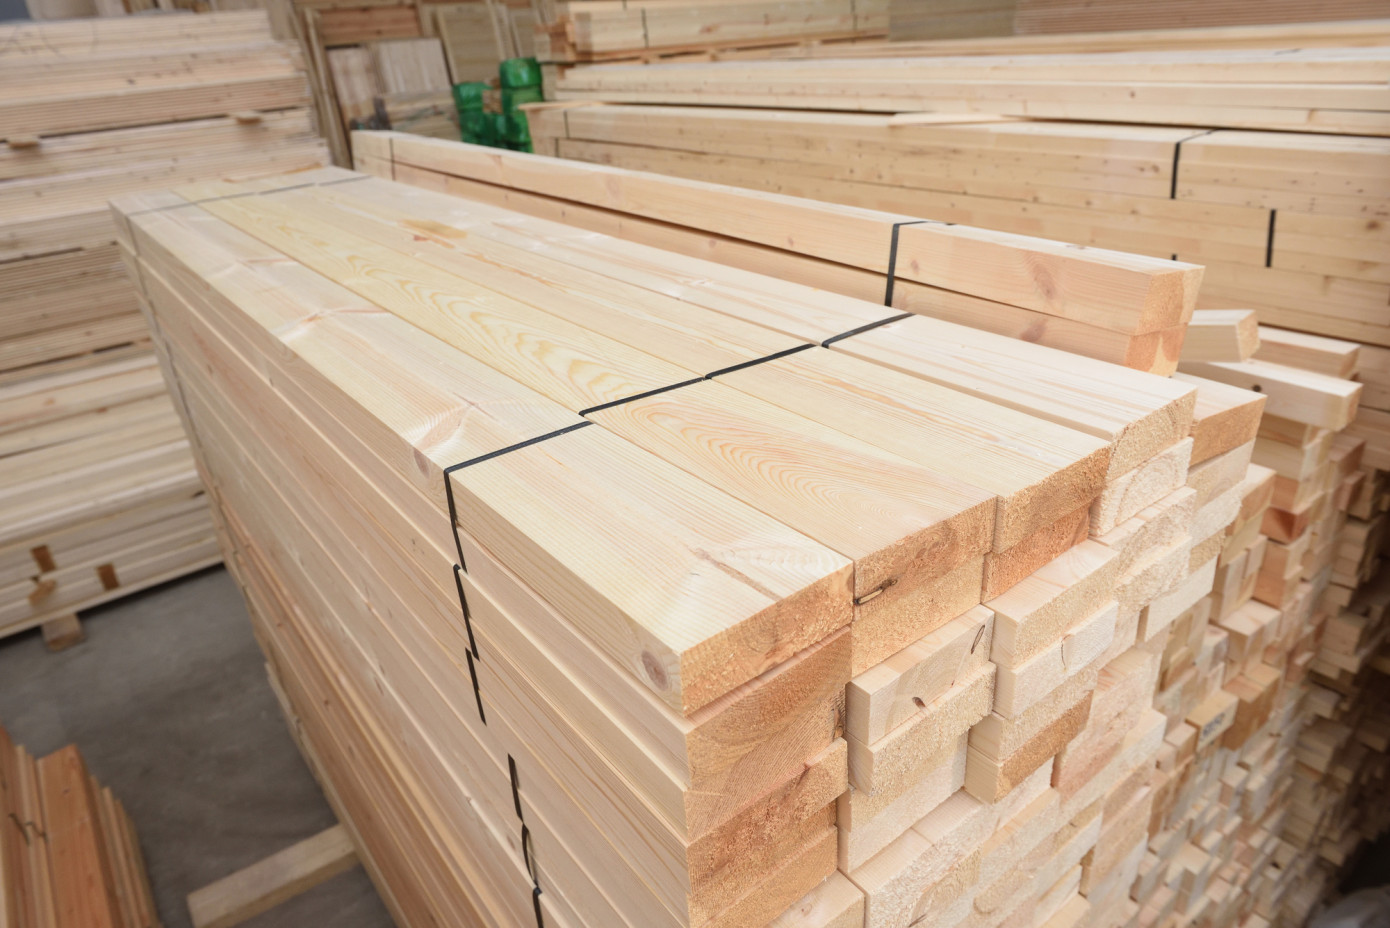 Exports of lumber from Sweden to U.S. decline 54 in January